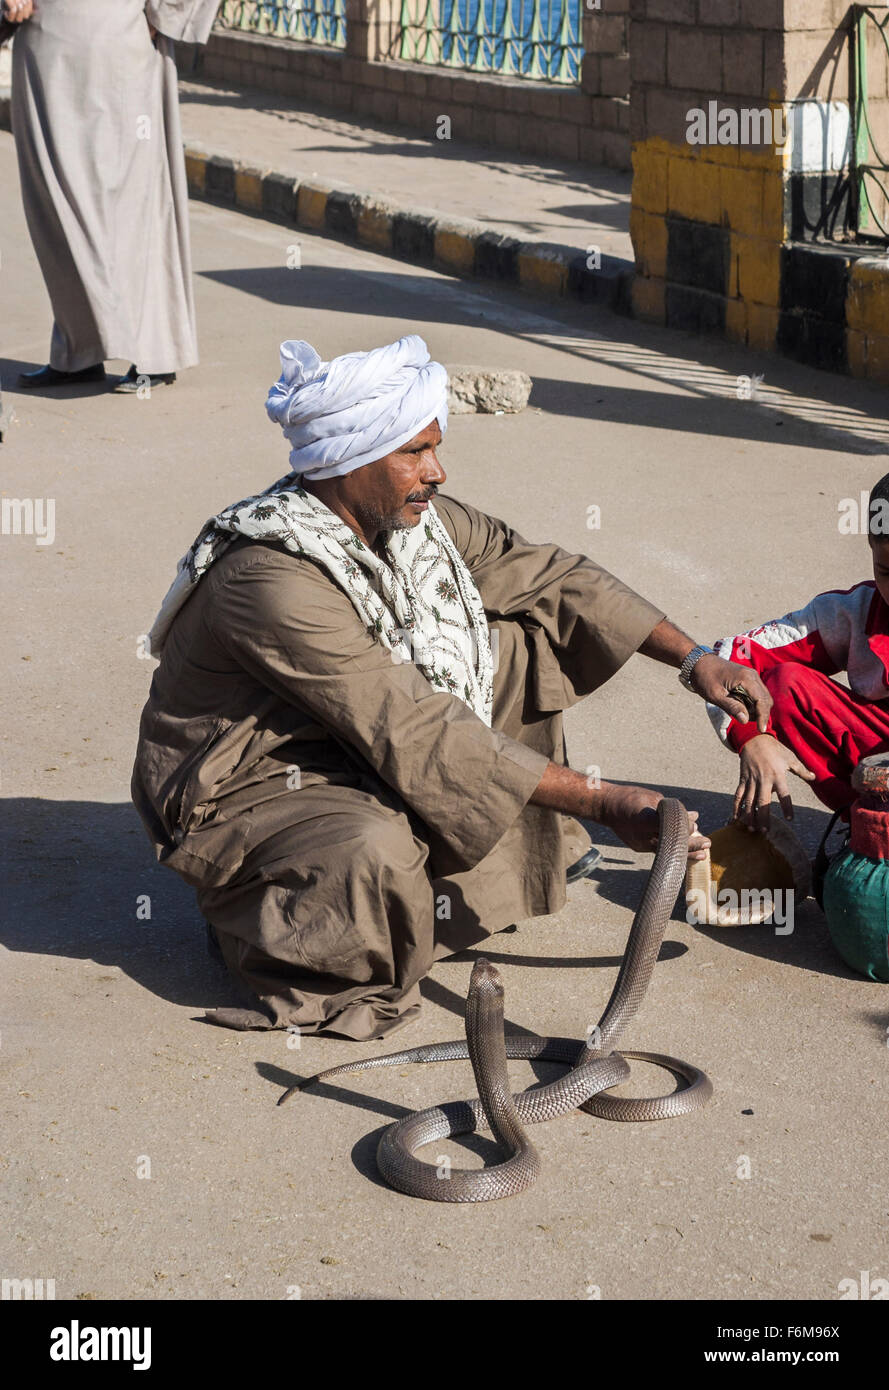 Local Egyptian man of Arab ethnicity with a white turban, snake charmer with cobras, Esna, Upper Egypt Stock Photo